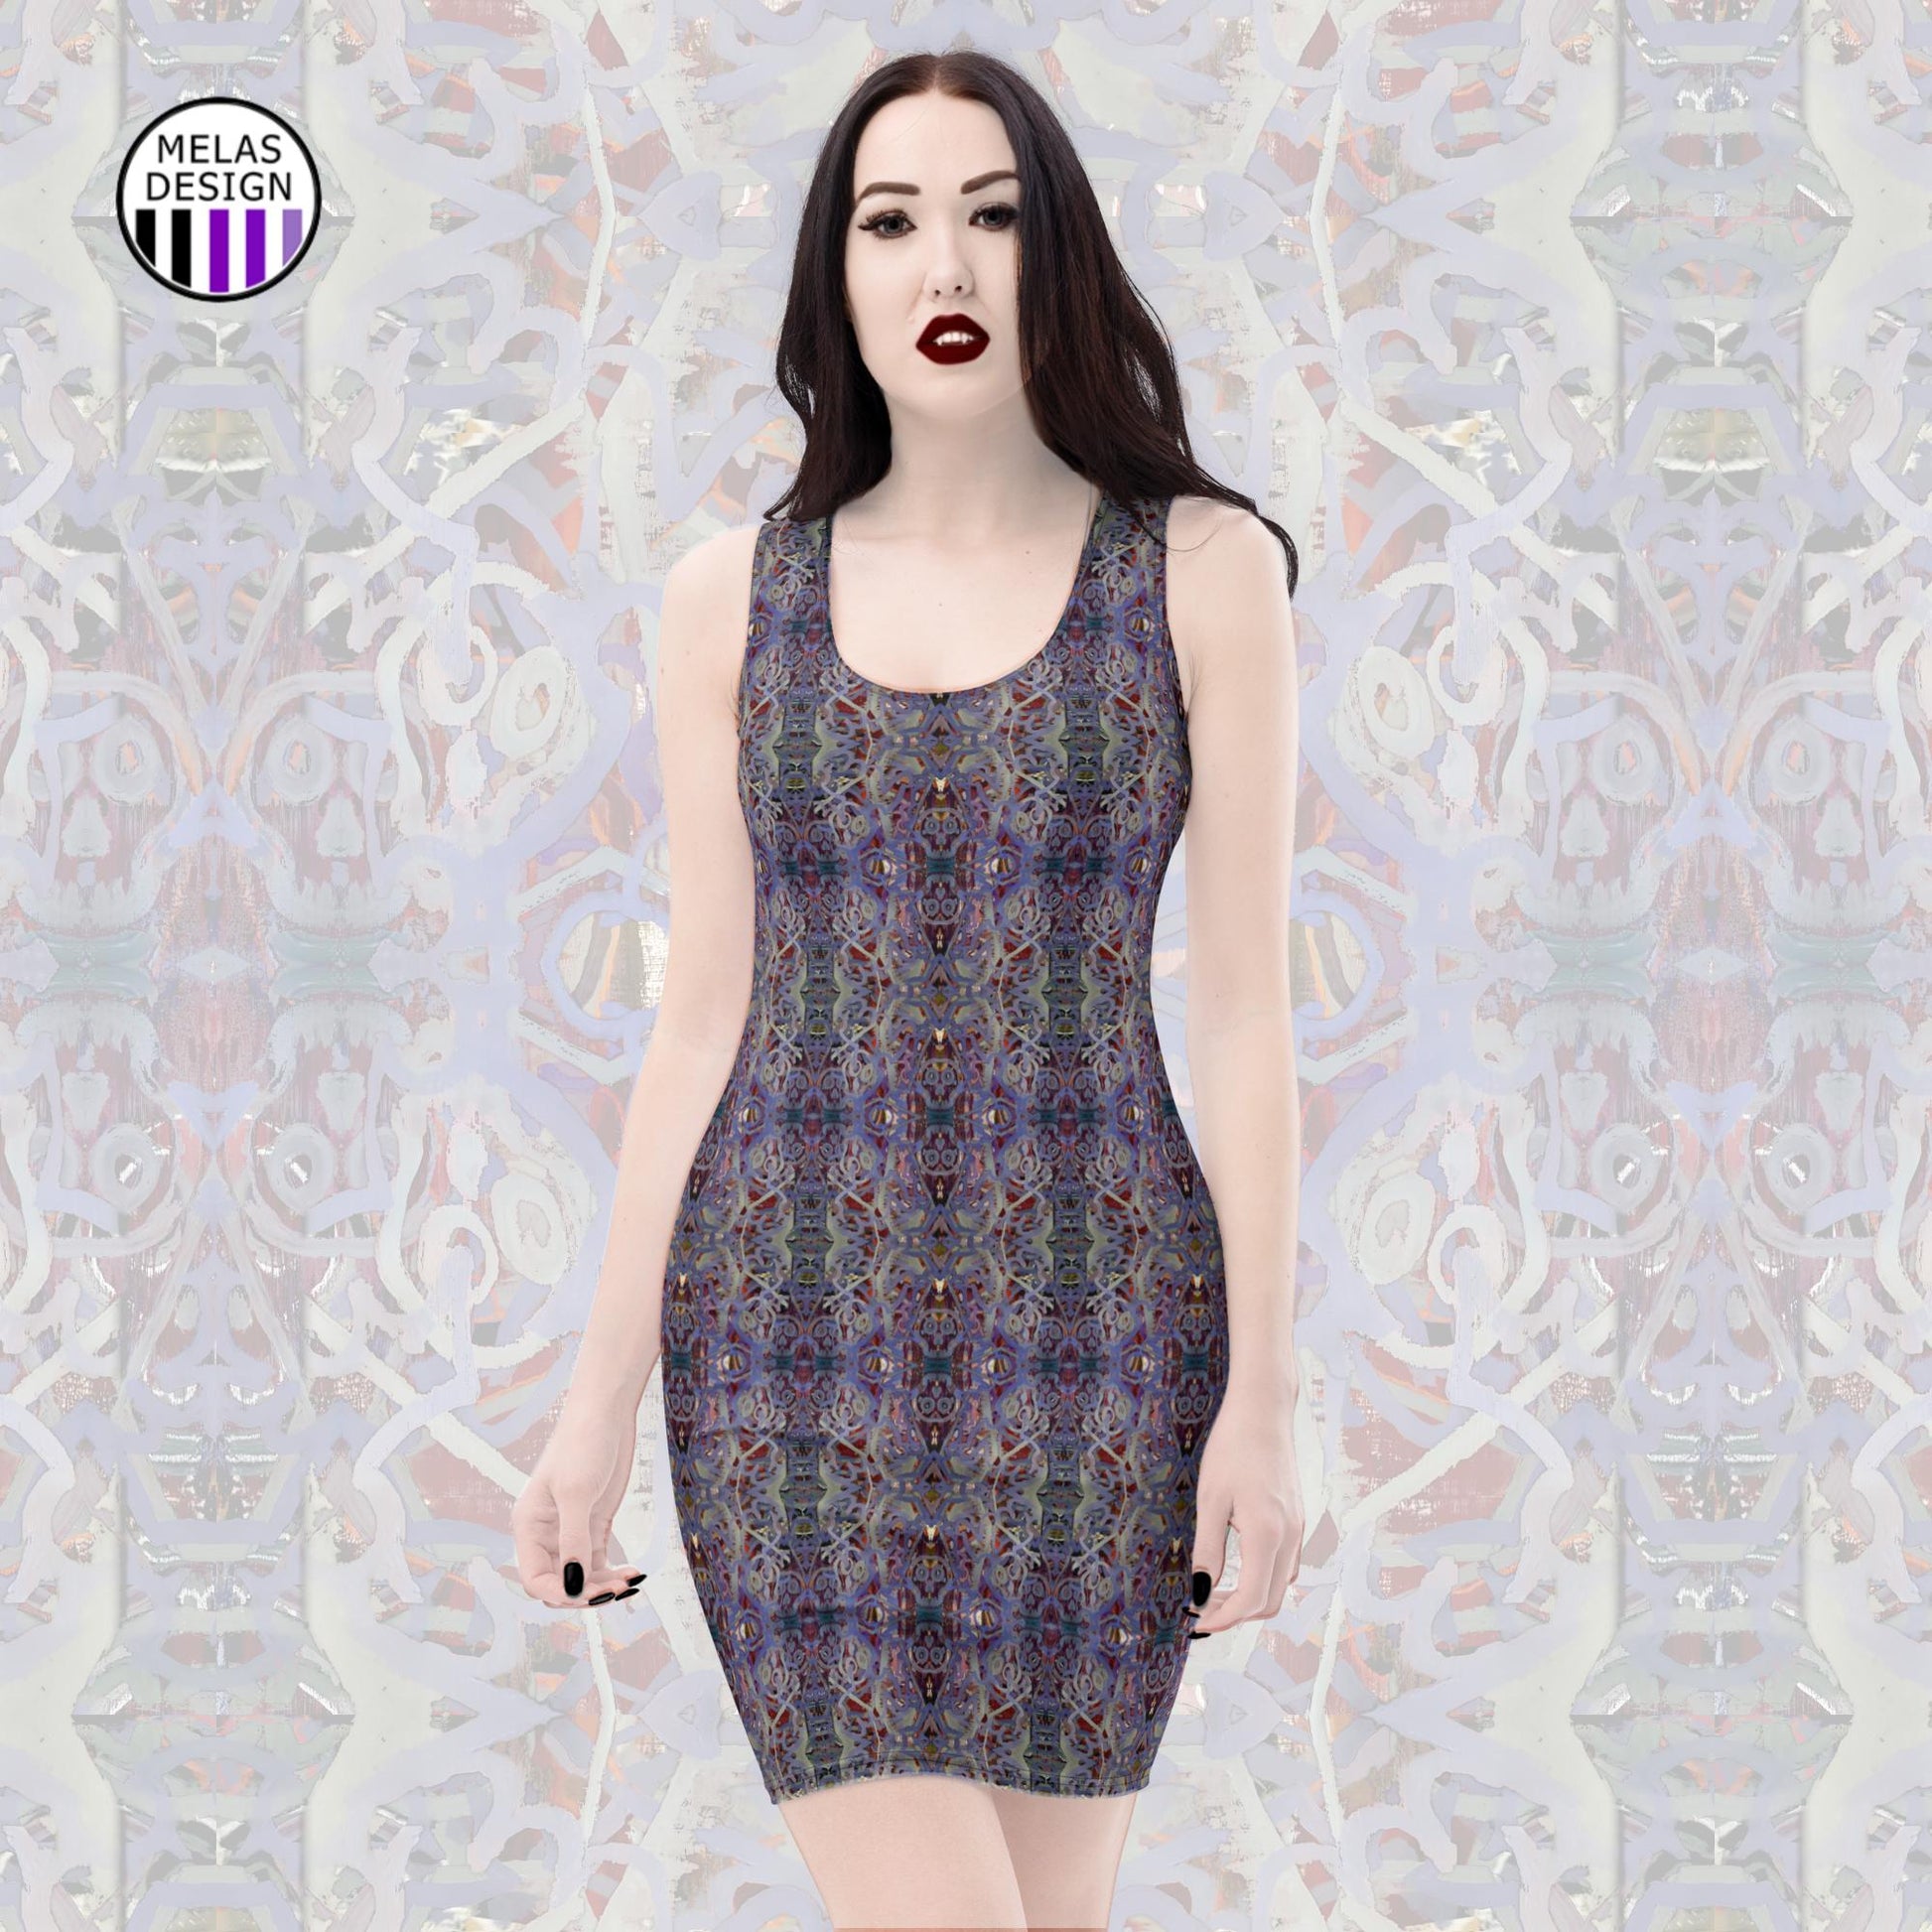 Voodoo Skull Coffin Pattern Body-Con Dress; Melasdesign; alternative; gothic; goth; witchy; voodoo; fashion; dress; bodycon; fitted; sleeveless; skull pattern; Halloween; Day of the Dead; witchy gothic clothing collection